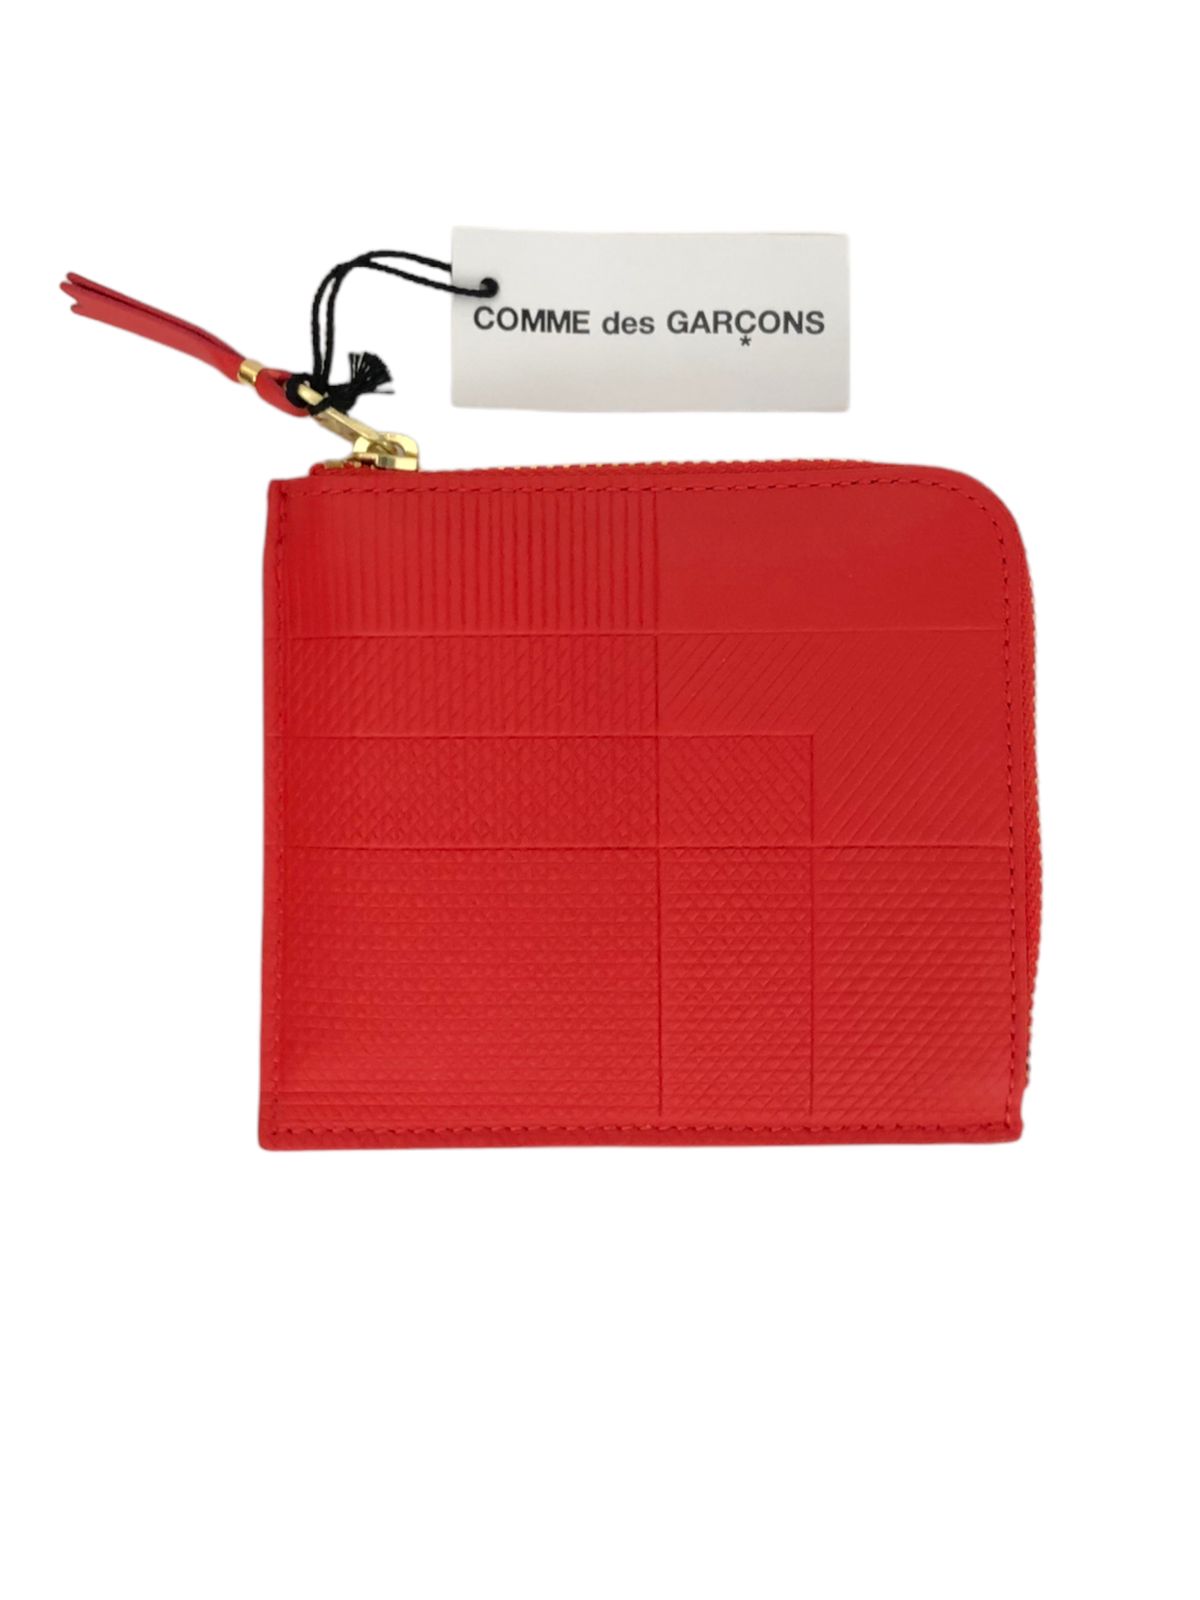 COMME des GARCONS (コムデギャルソン) INTERSECTION WALLET RD ミニ 